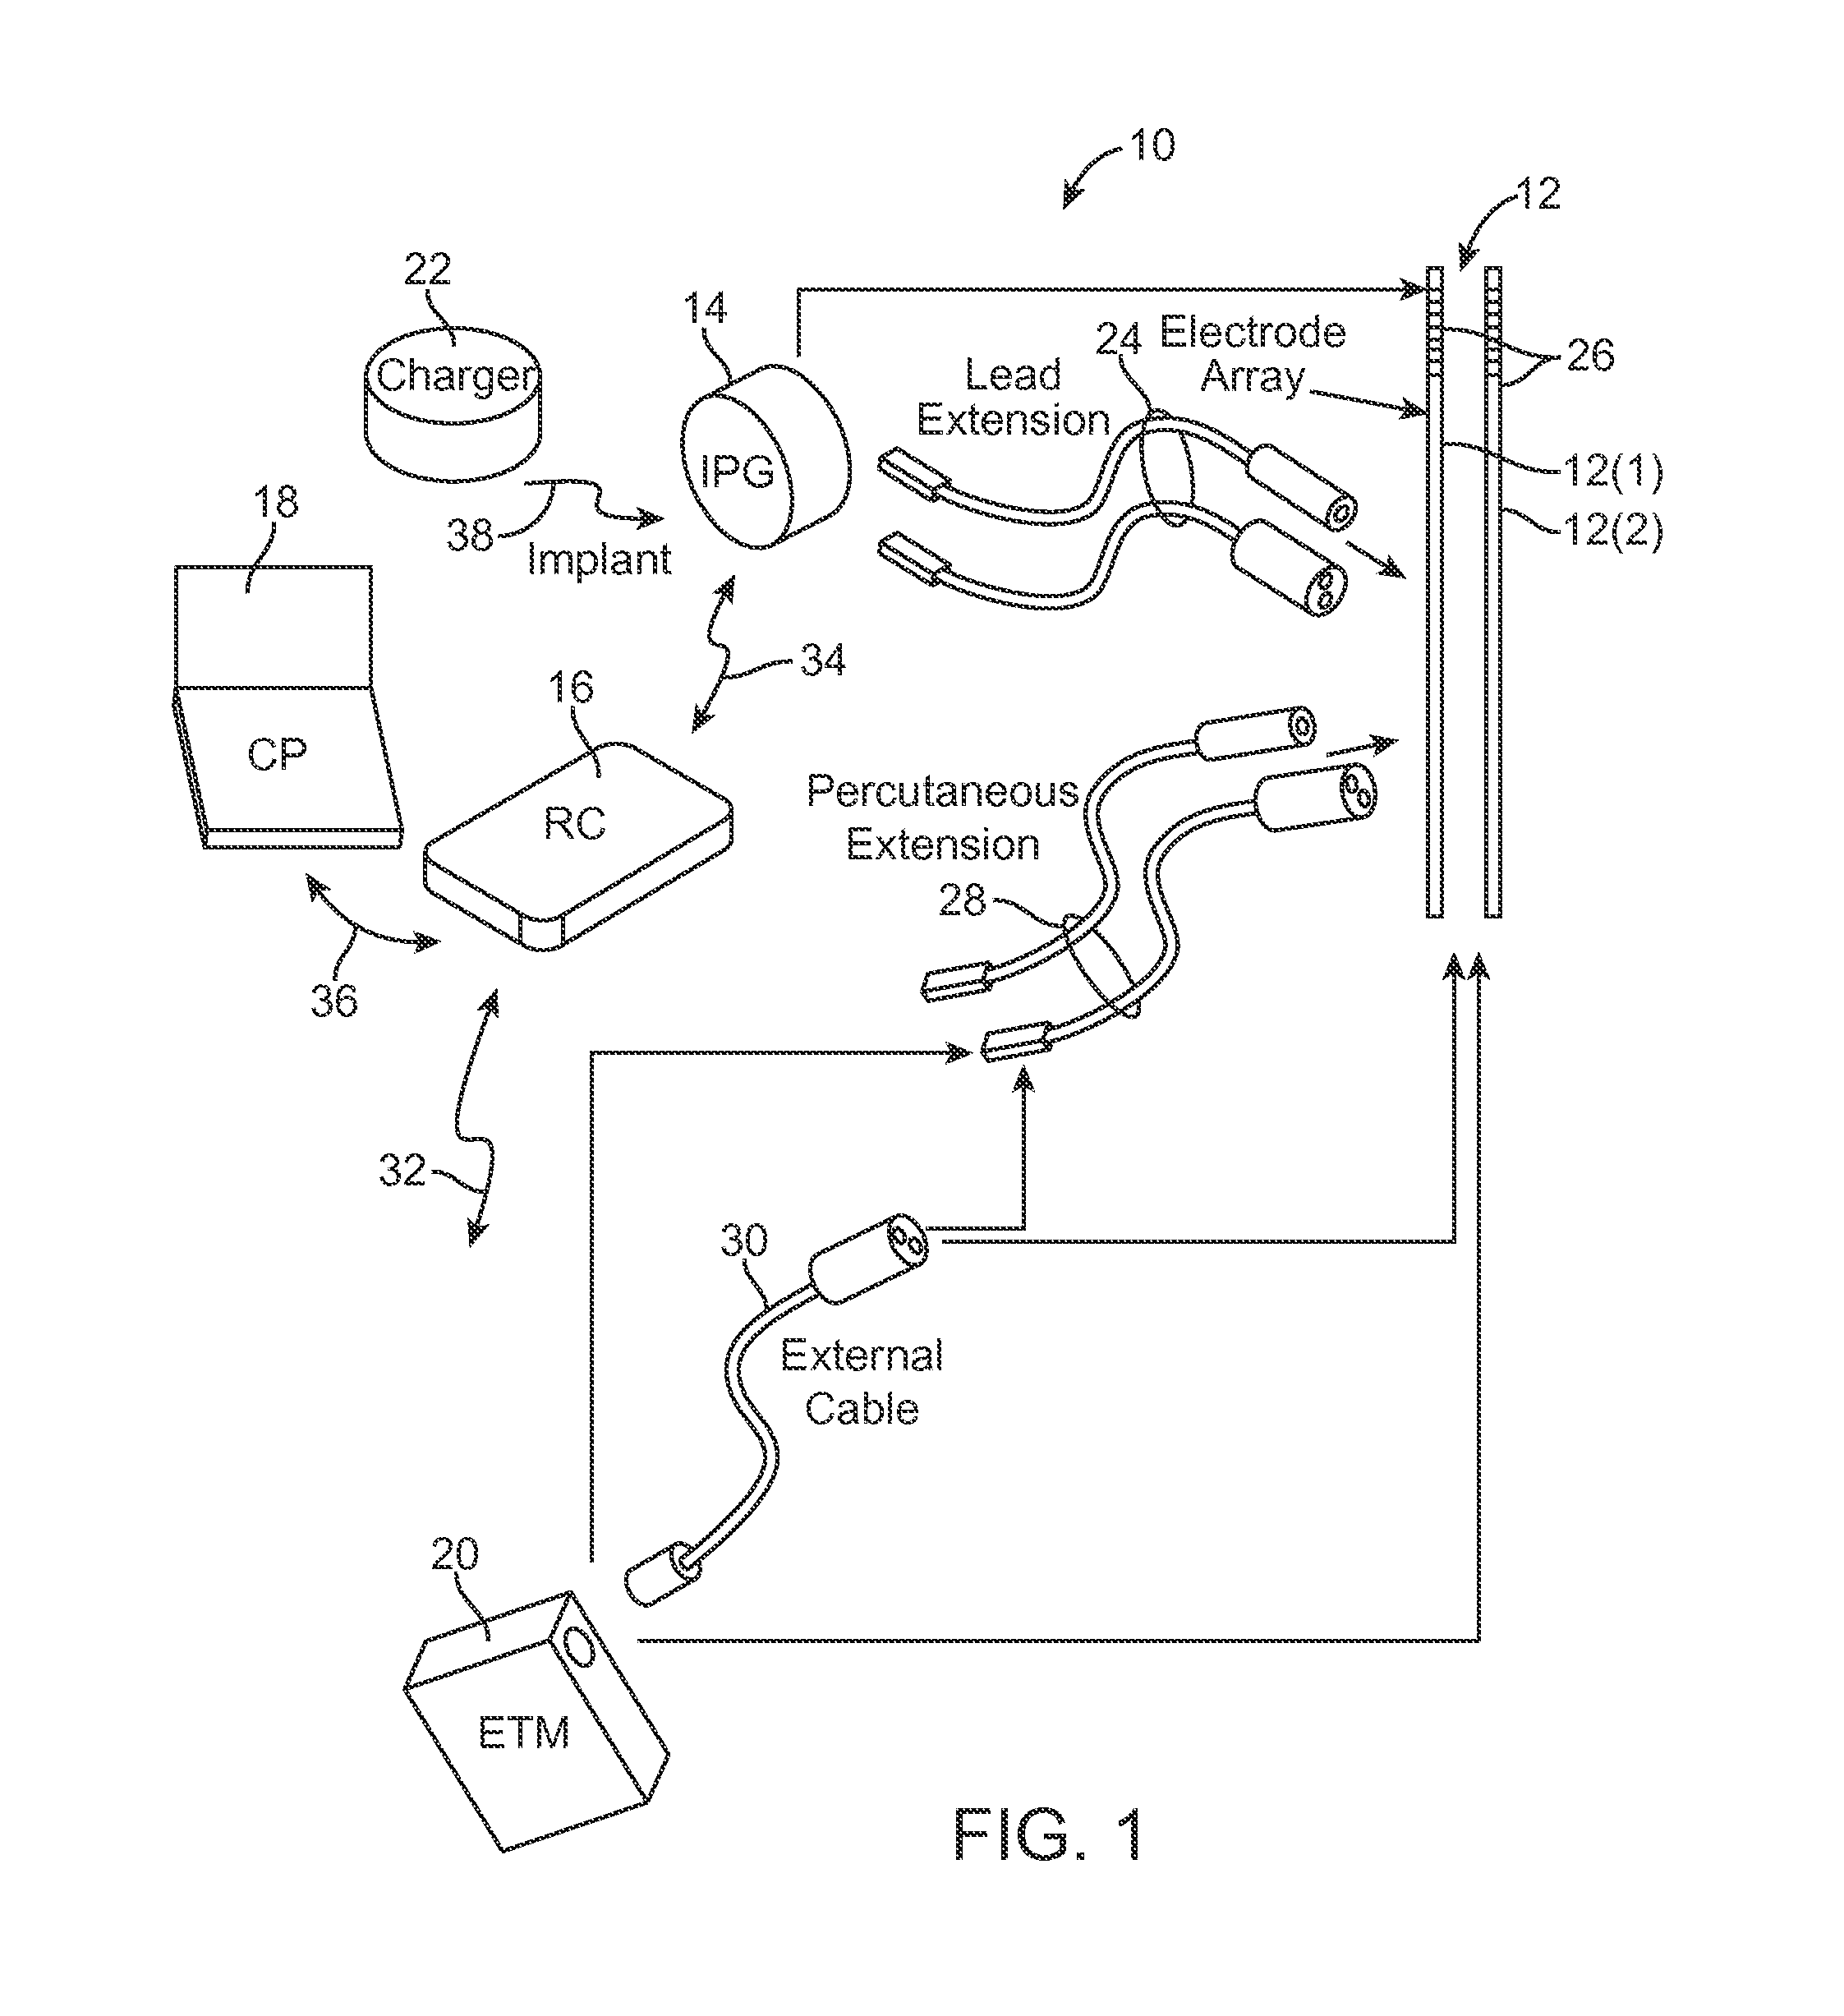 Systems and methods of providing modulation therapy without patient-perception of stimulation